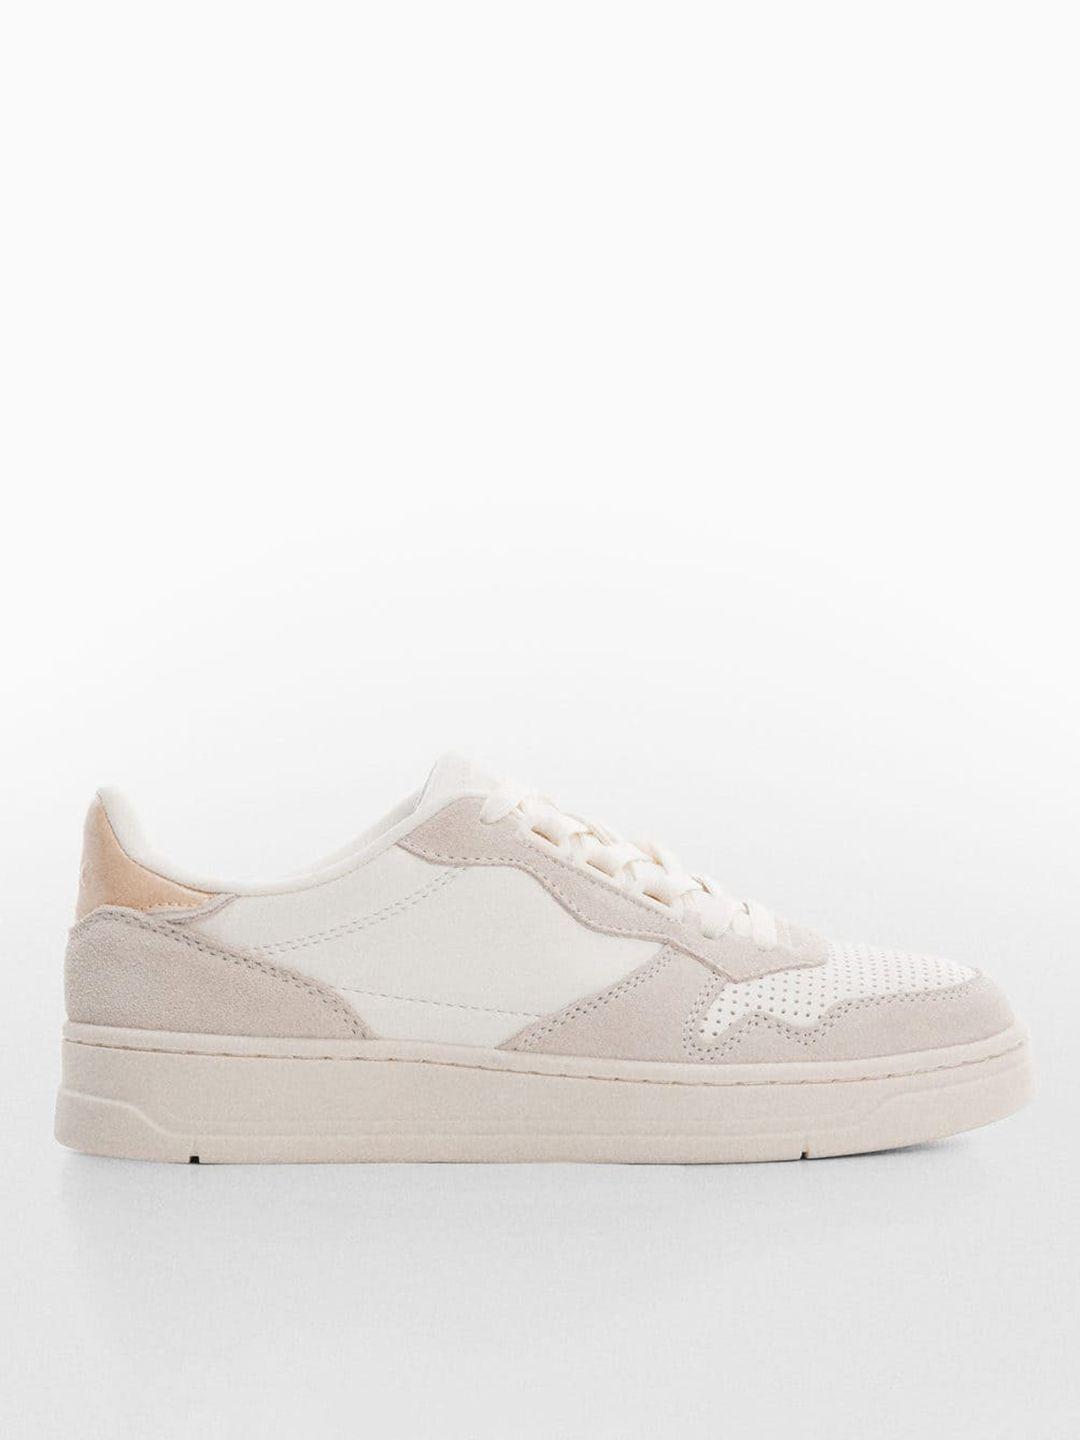 mango women colourblocked perforated leather sneakers